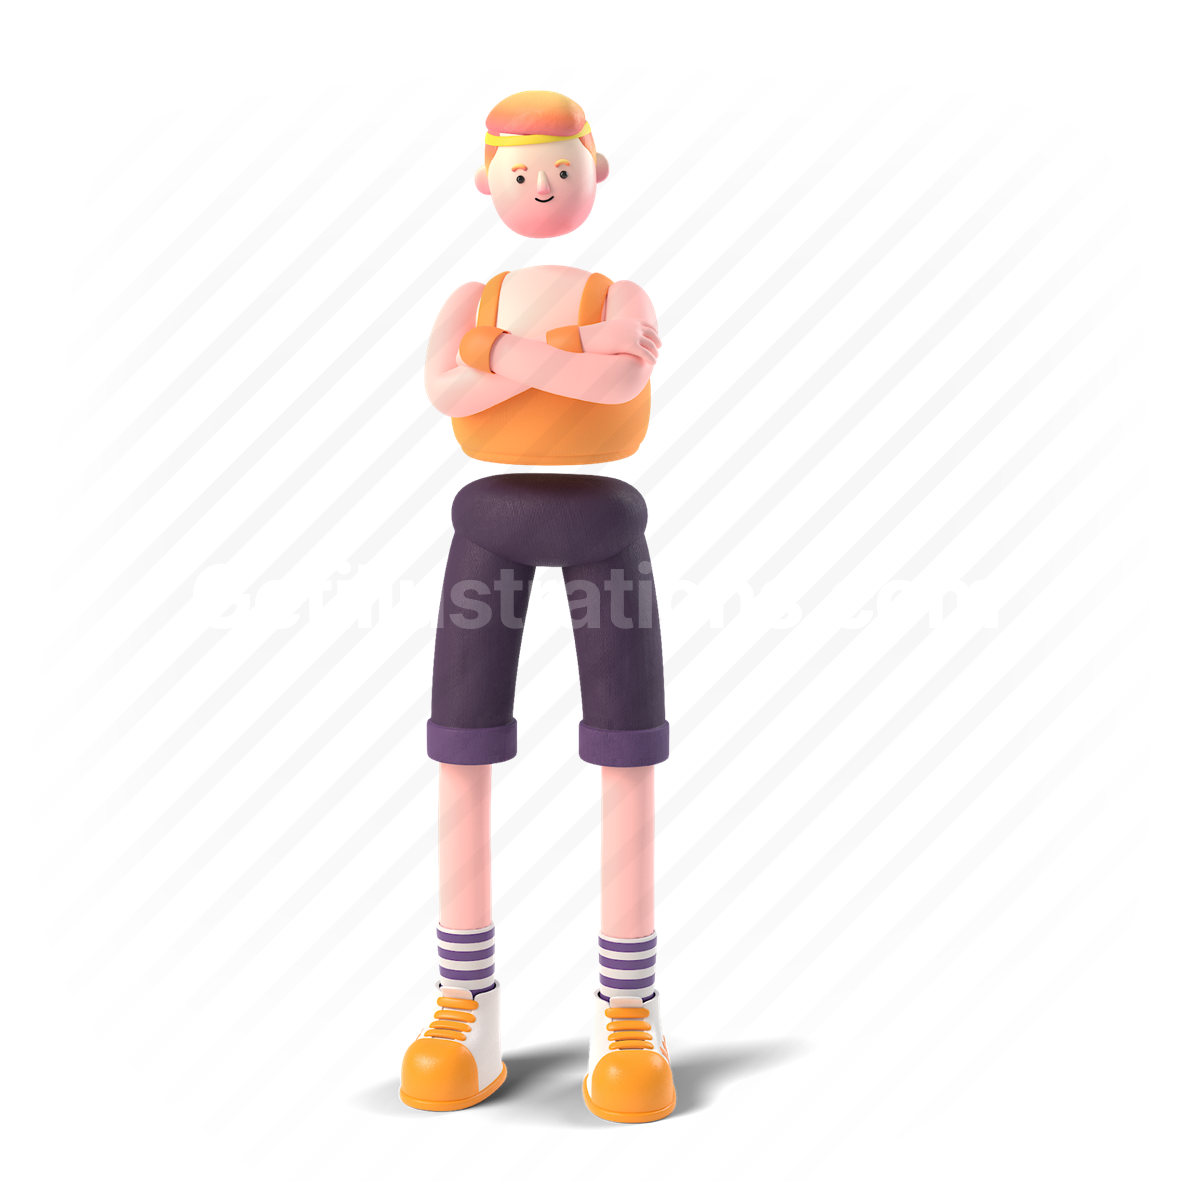 3d, people, person, character, man, athlete, athletic, stand, arms crossed